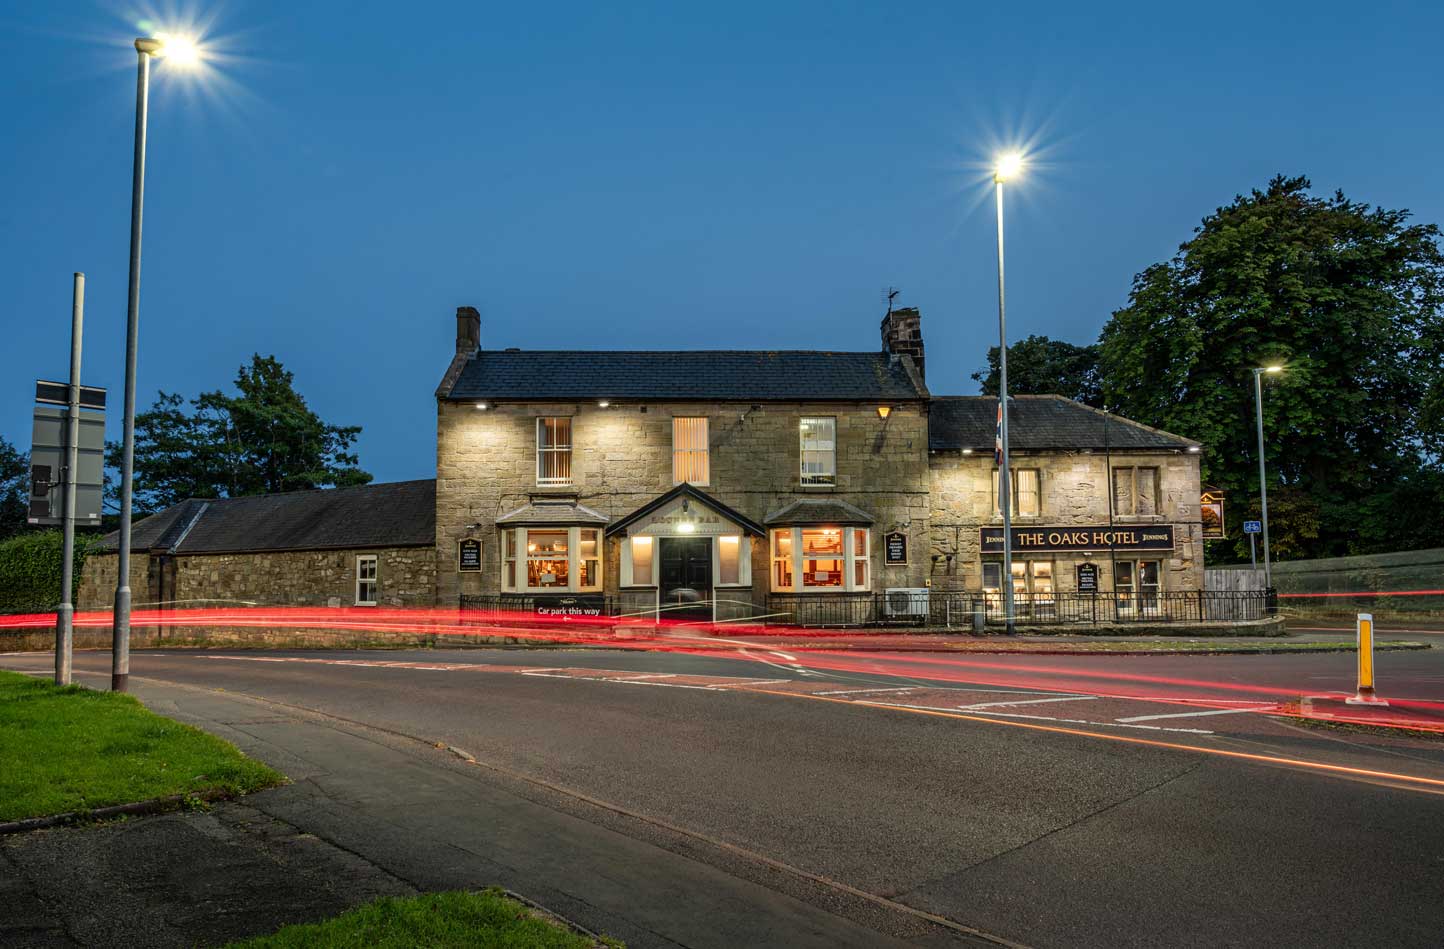 Light Trails at The Oaks Hotel in Alnwick, Northumberland.